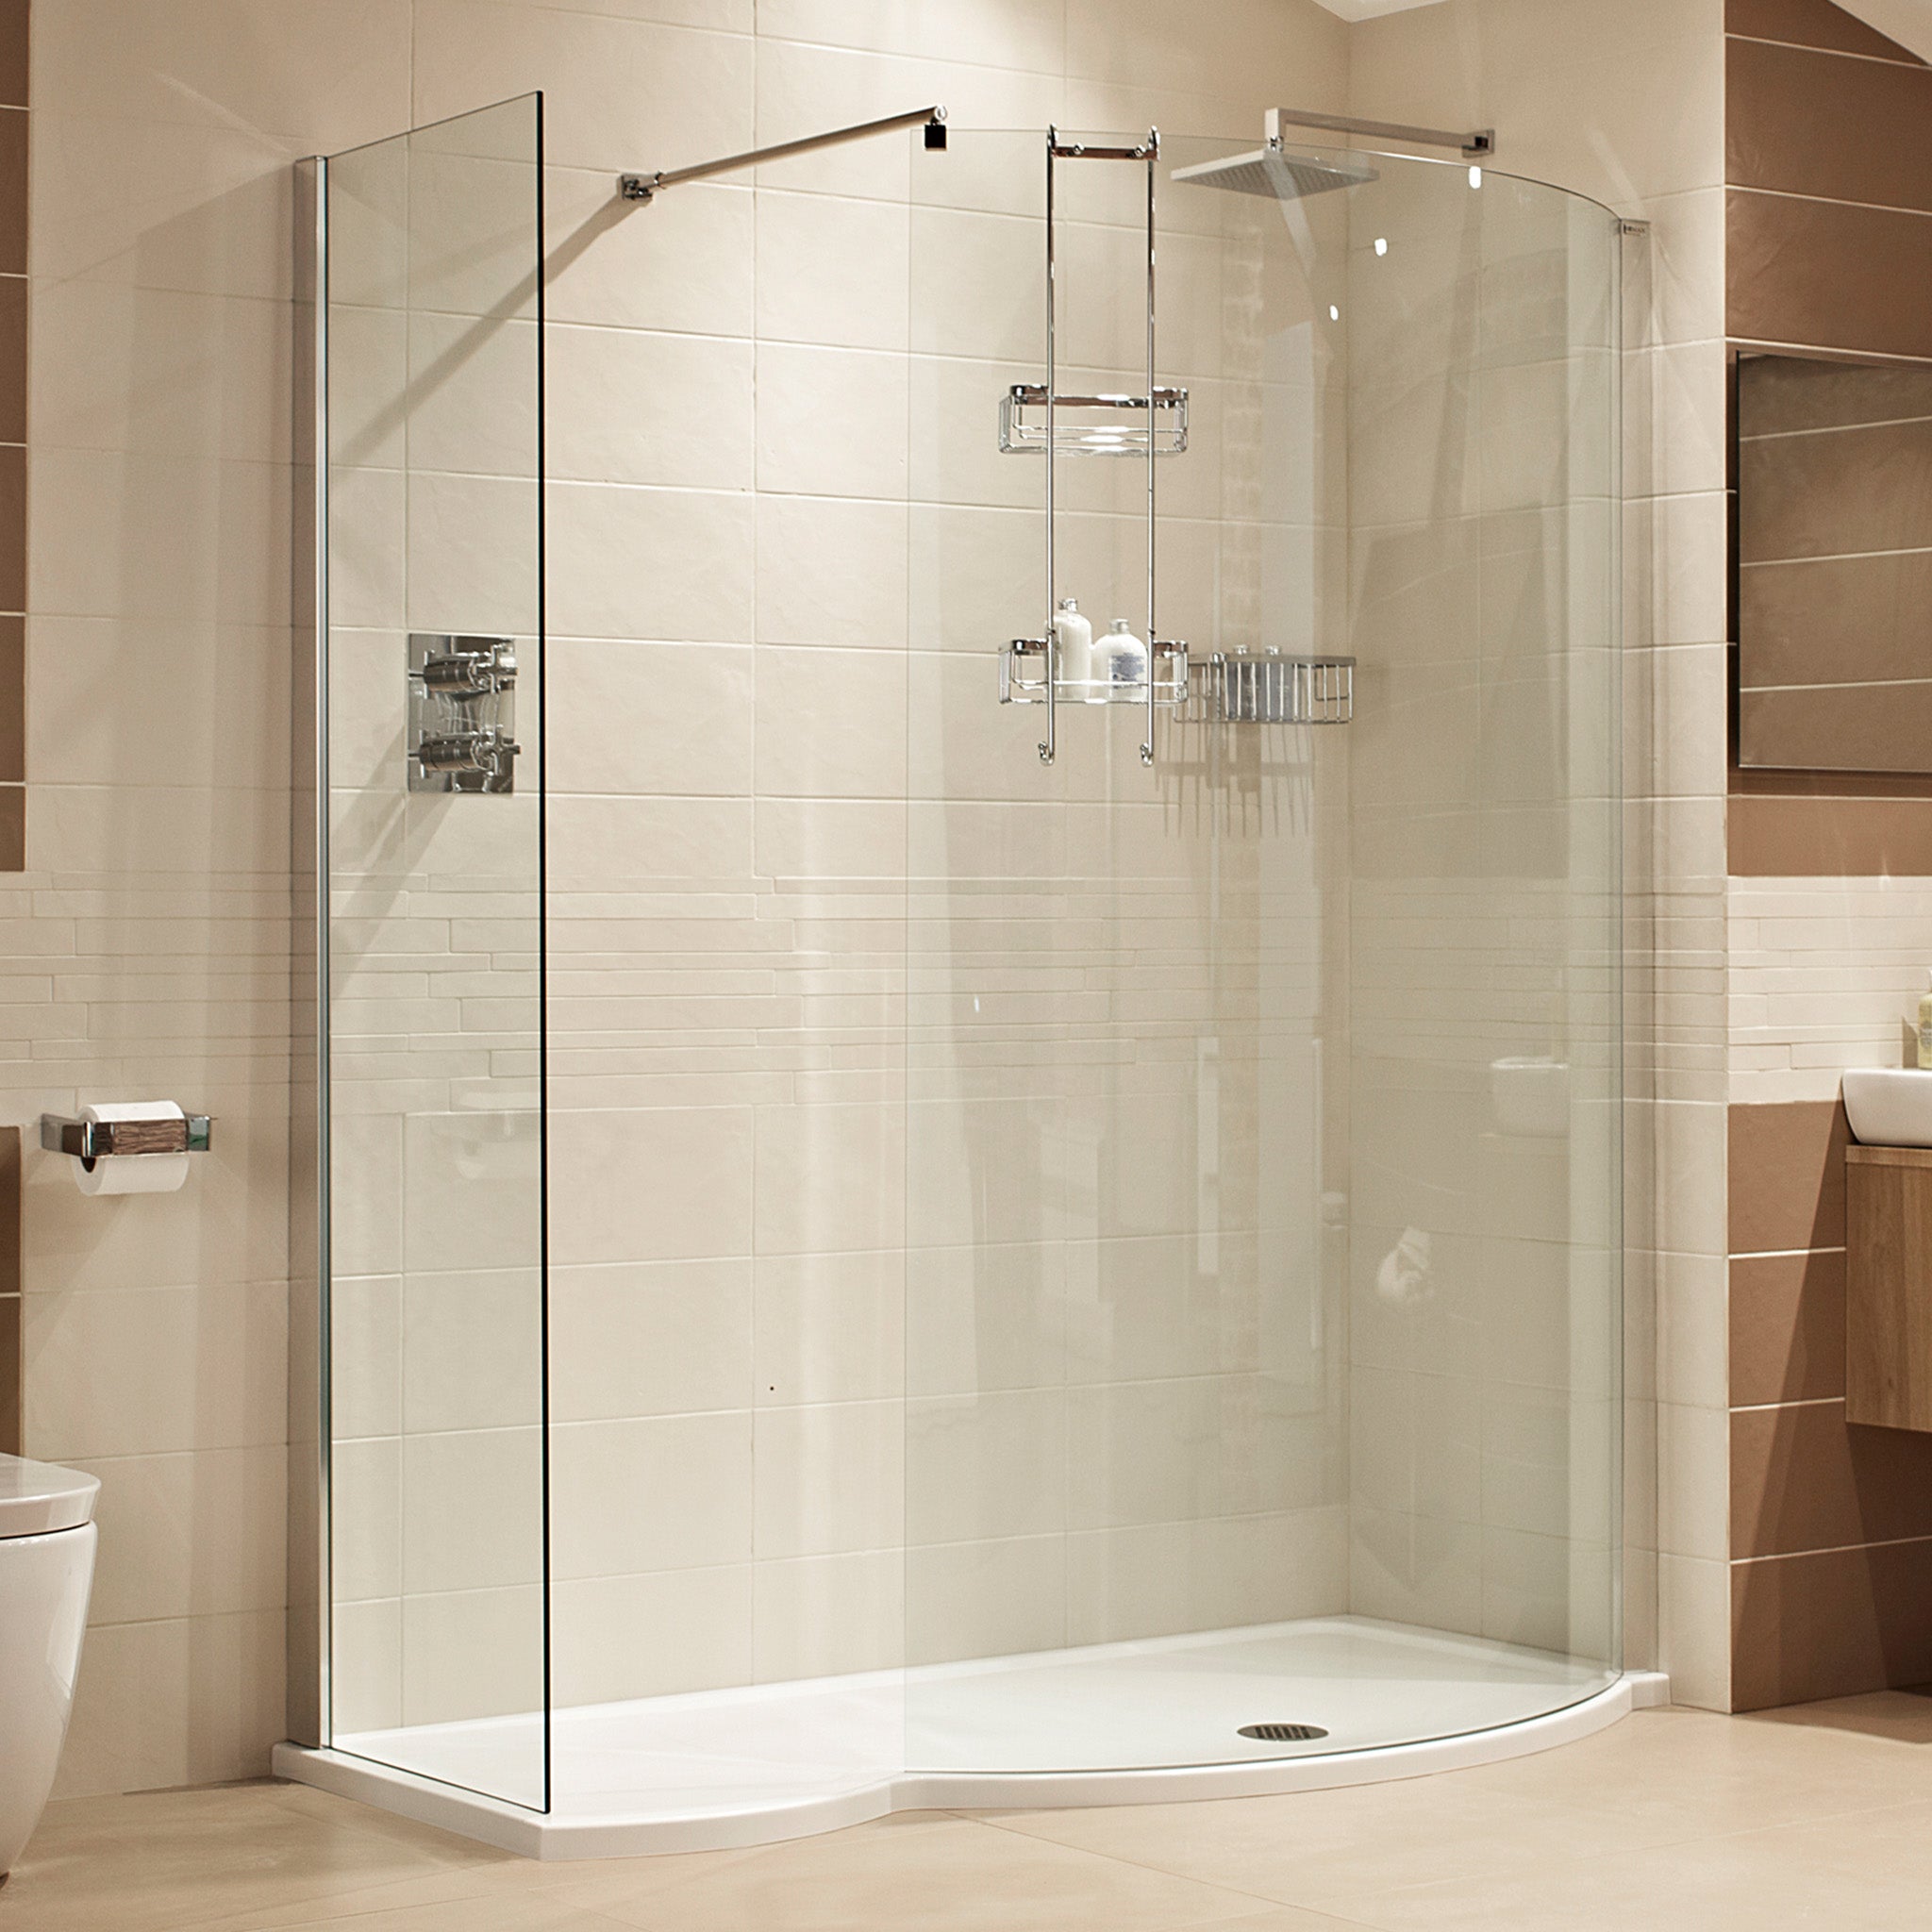 Roman Innov8 Curved Walk-In Shower Enclosure (Without Tray)